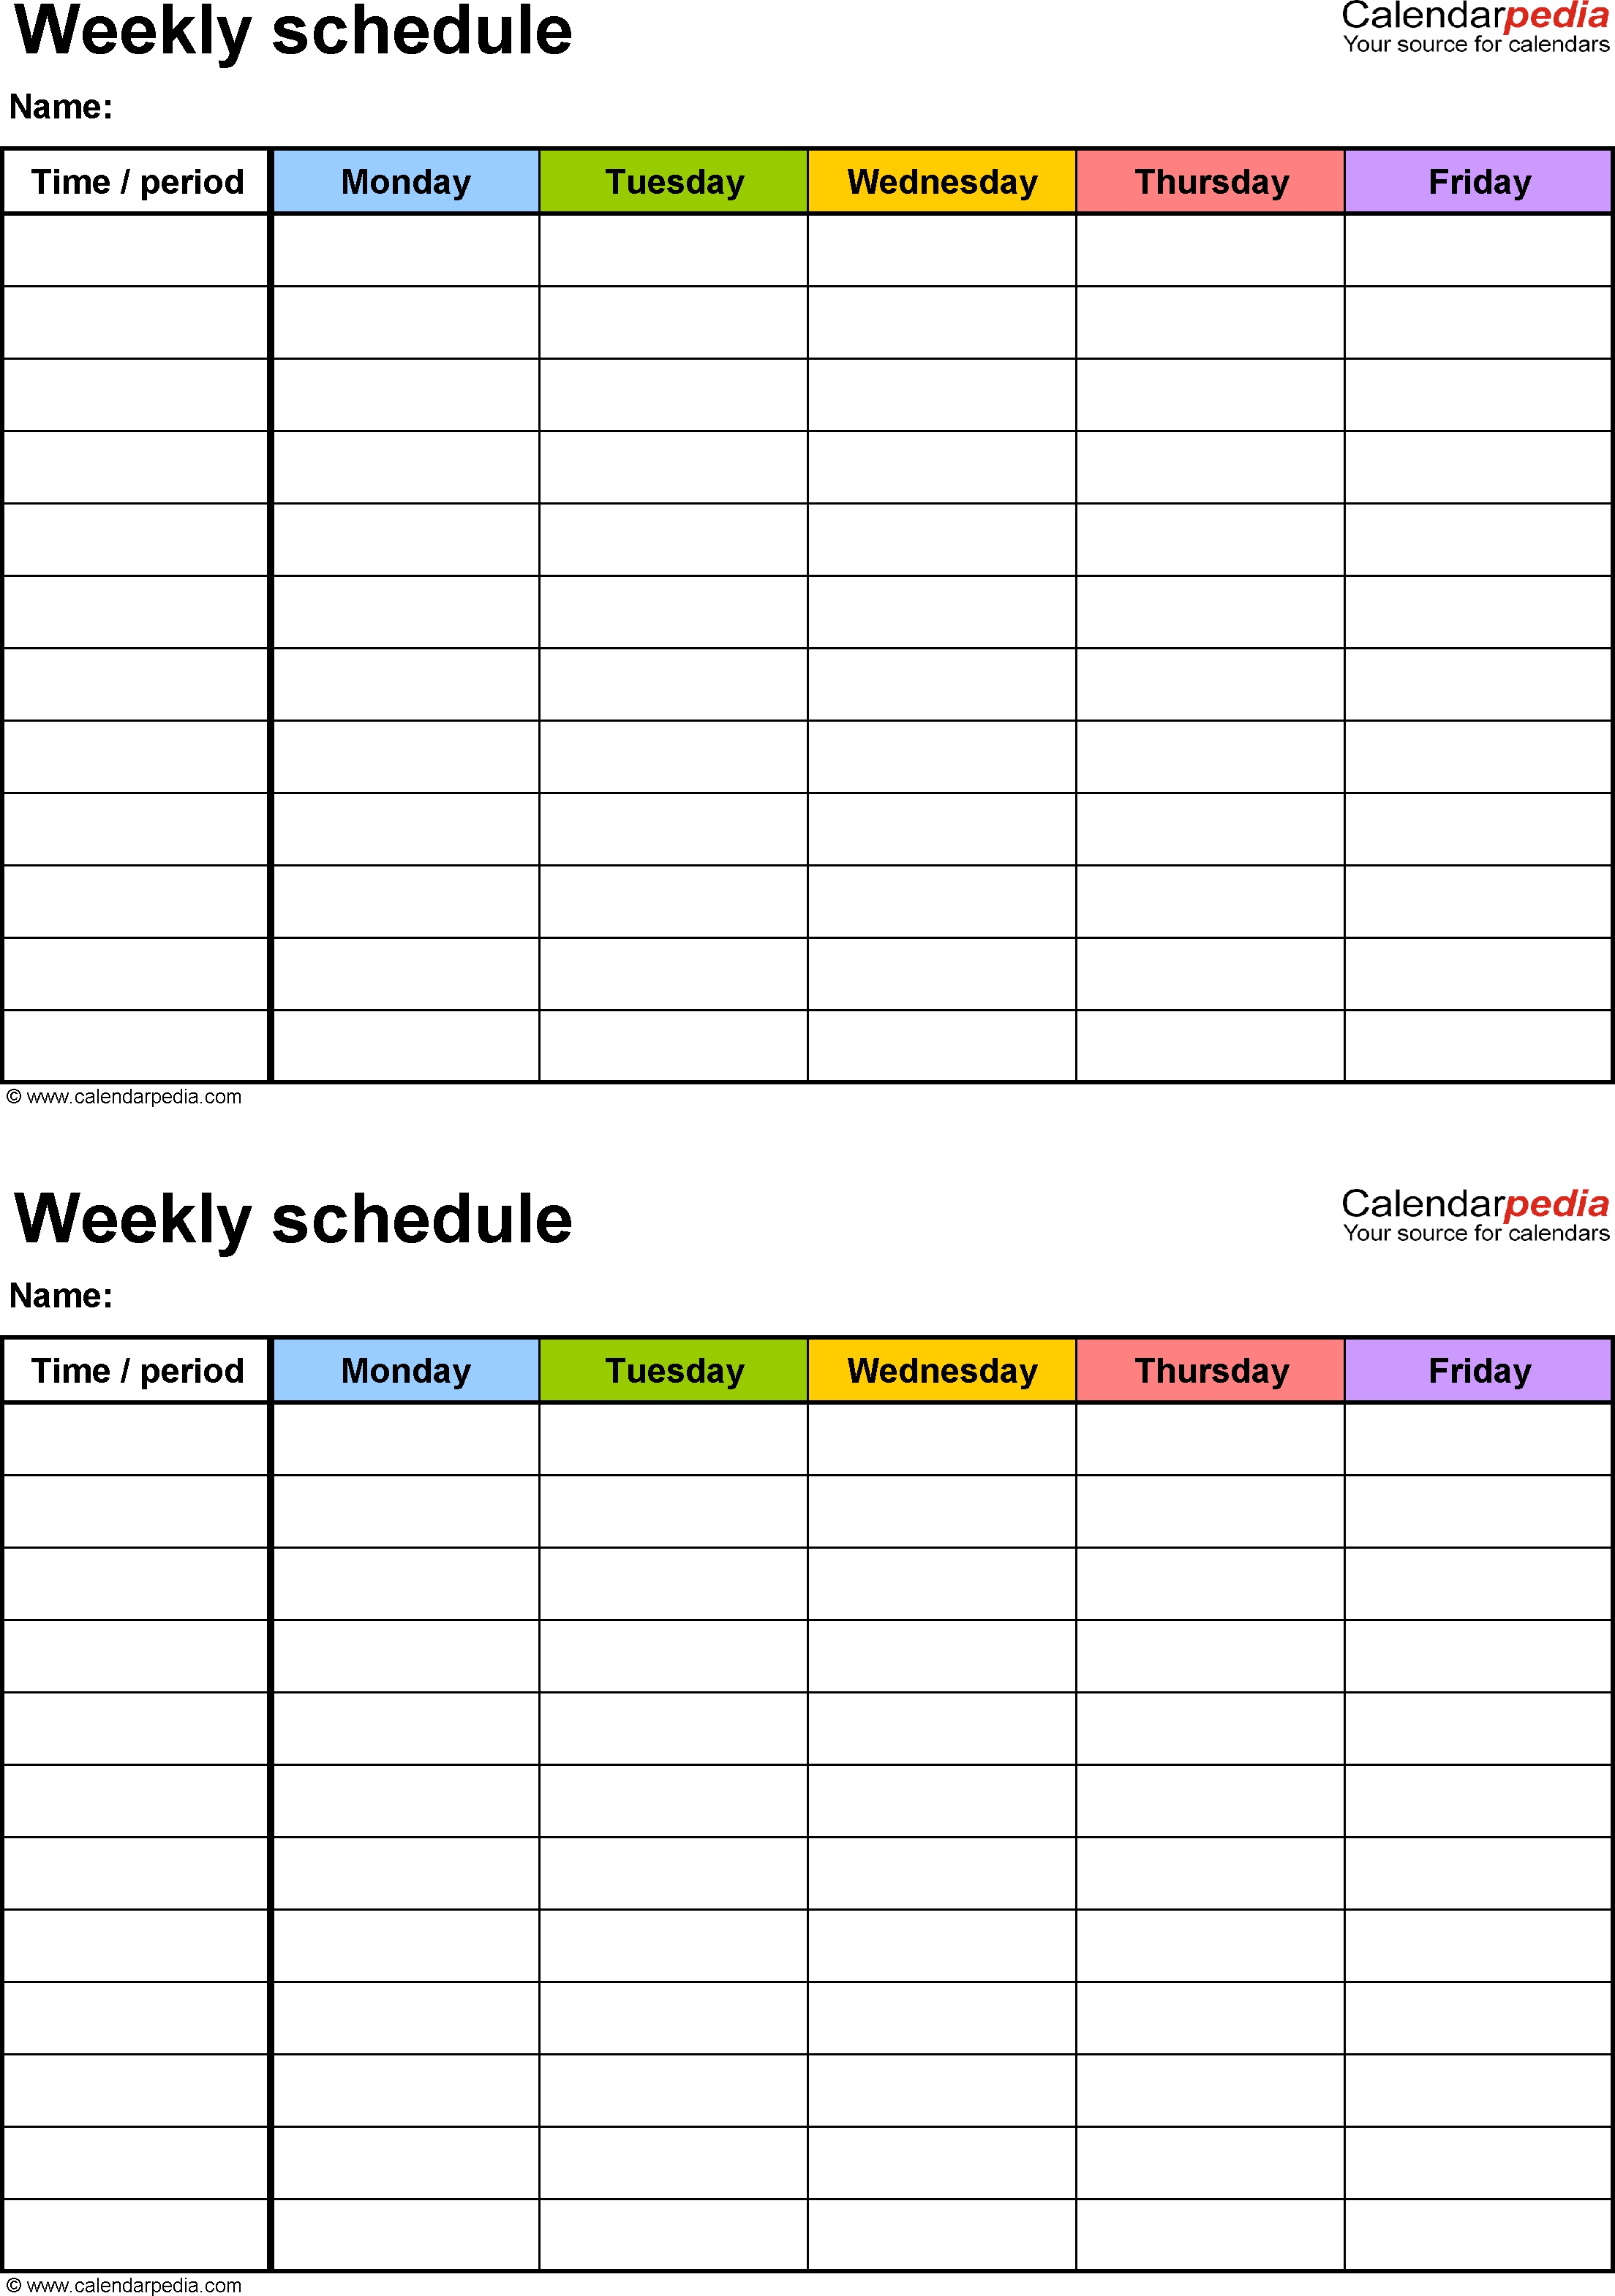 Free Weekly Schedule Templates For Word - 18 Templates-Mon To Friday Monthly Calendar Templates